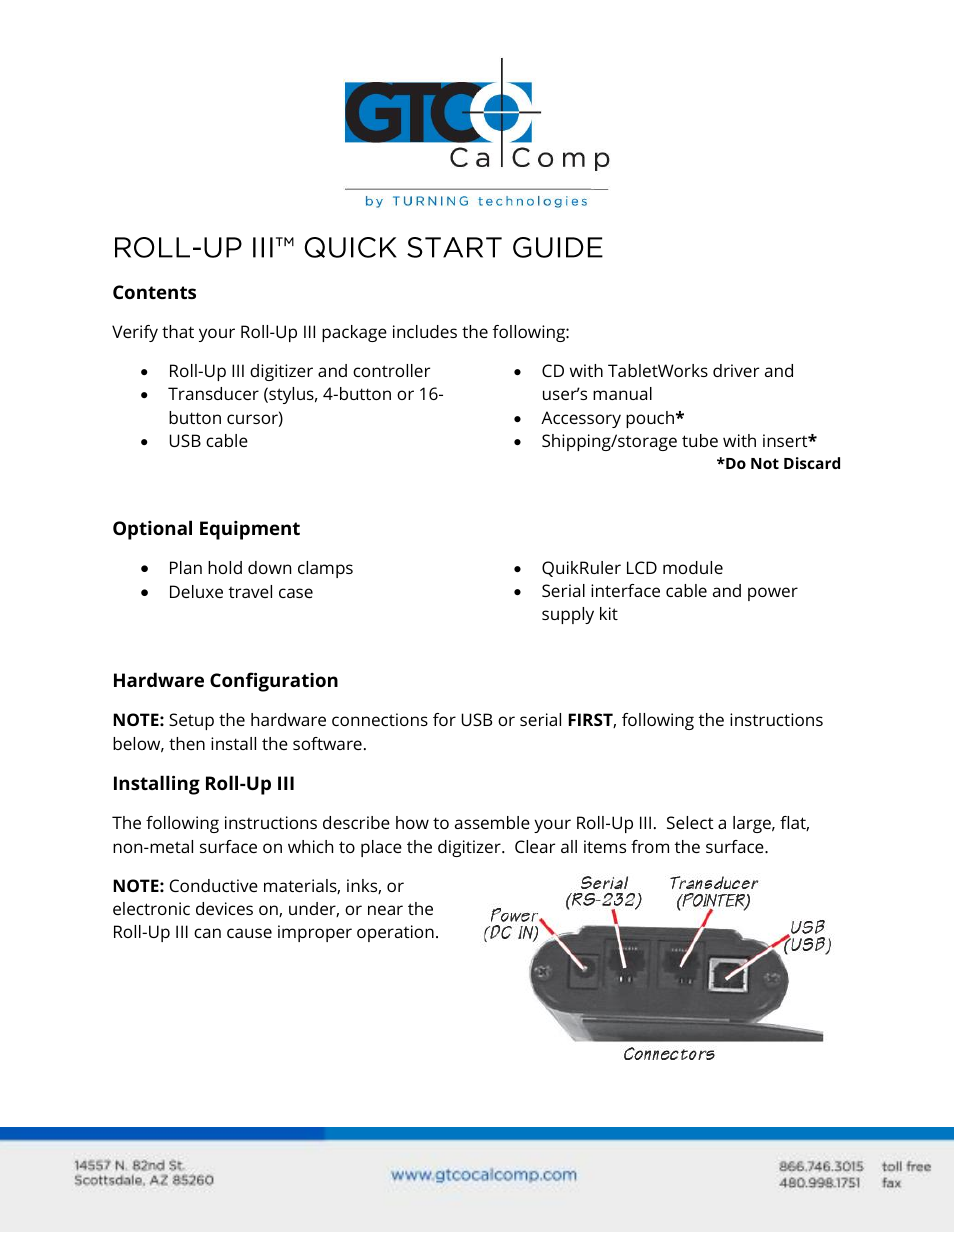 Roll-Up III - Quick Start Guide